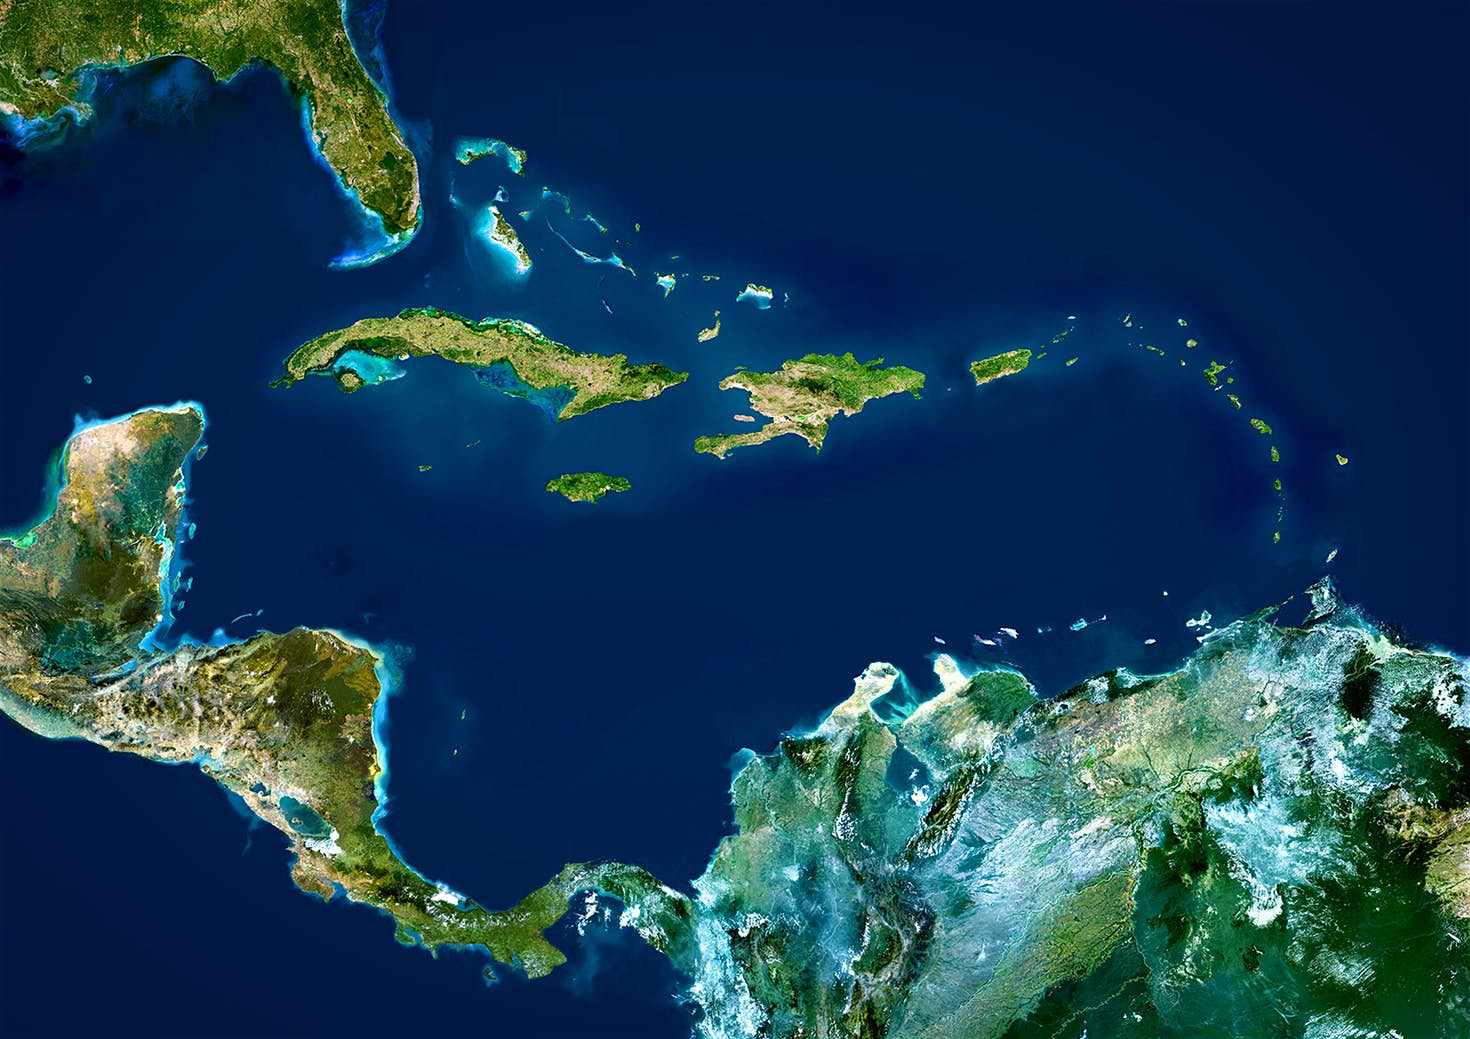 the Carribean region affected by the hurricane